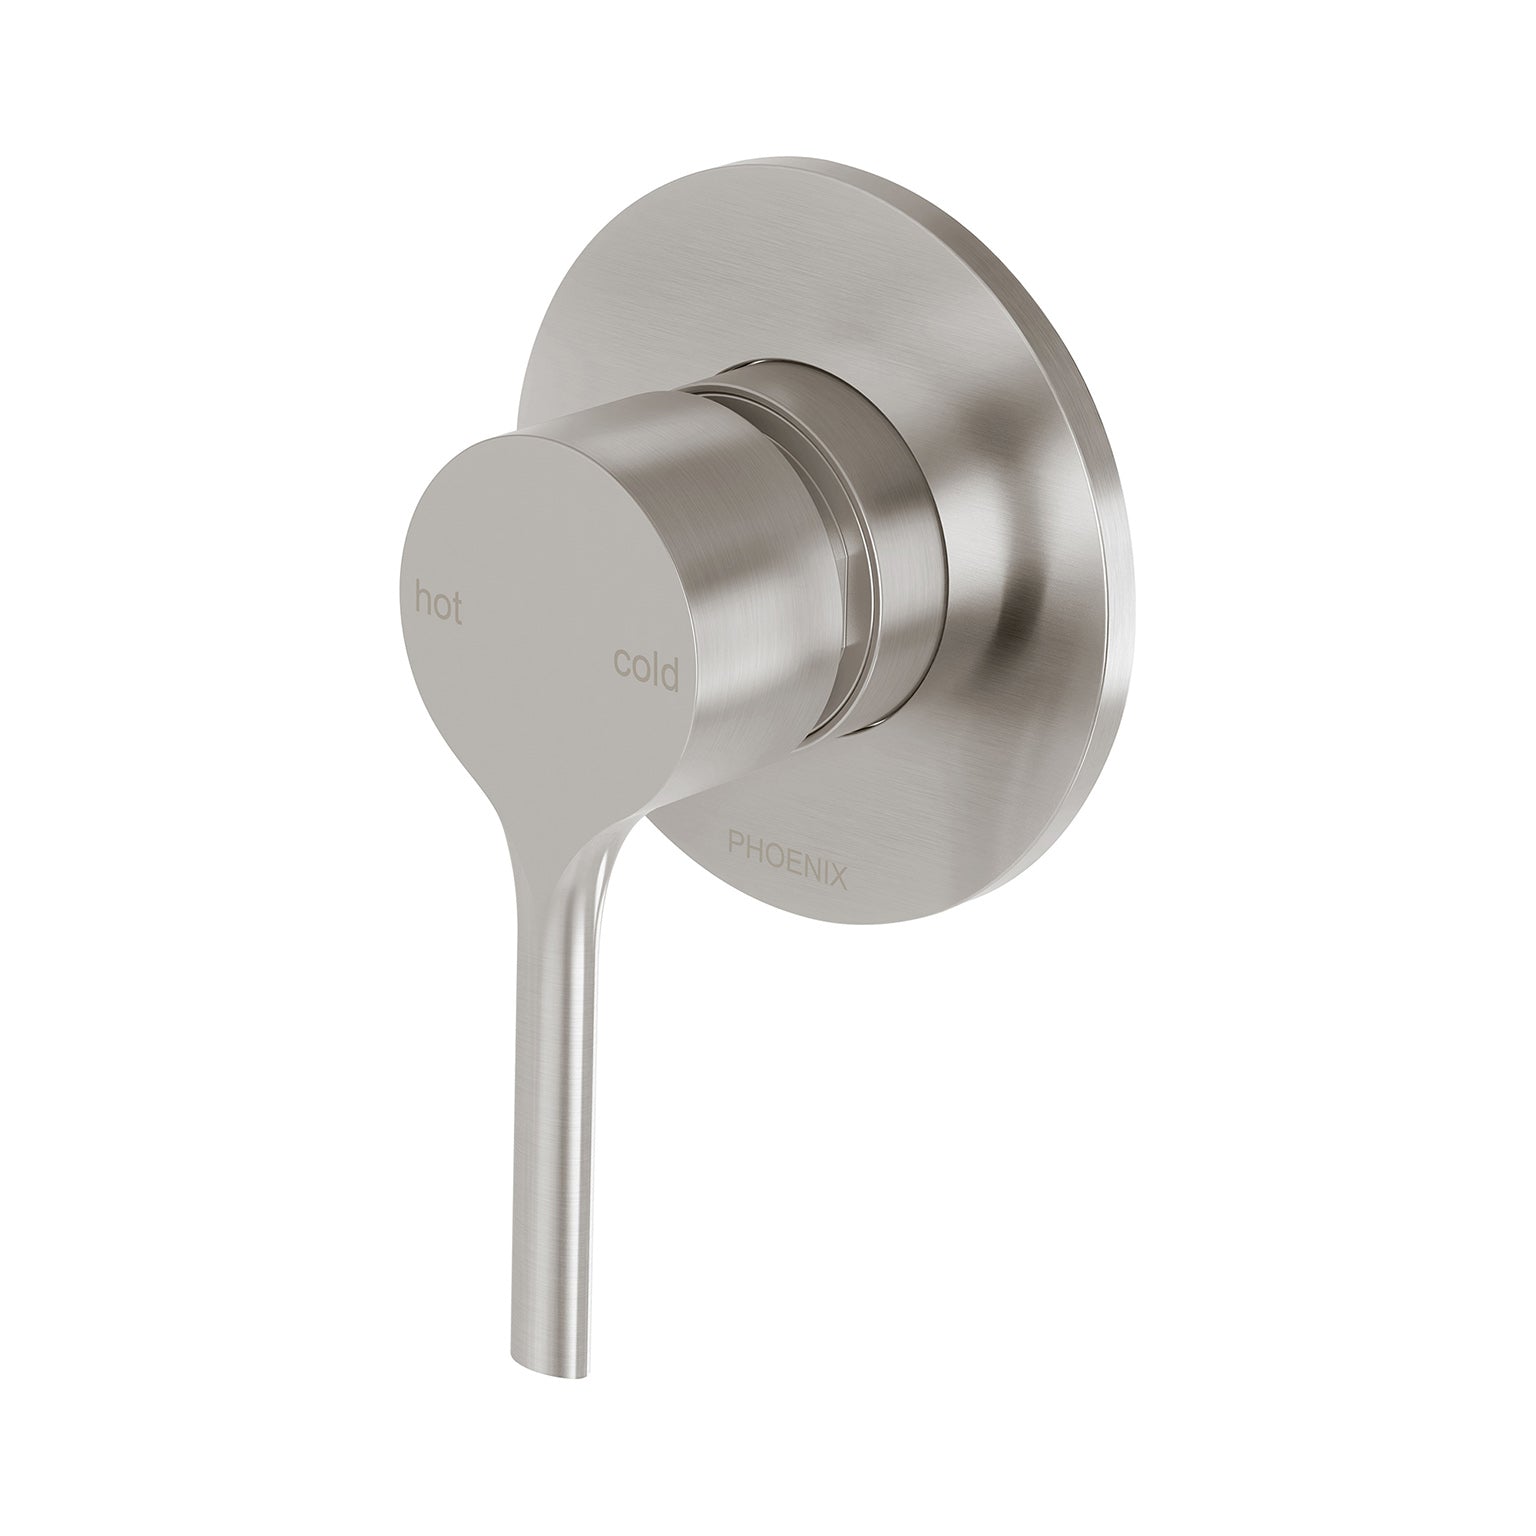 PHOENIX VIVID SLIMLINE OVAL SWITCHMIX SHOWER / WALL MIXER FIT-OFF AND ROUGH-IN KIT BRUSHED NICKEL